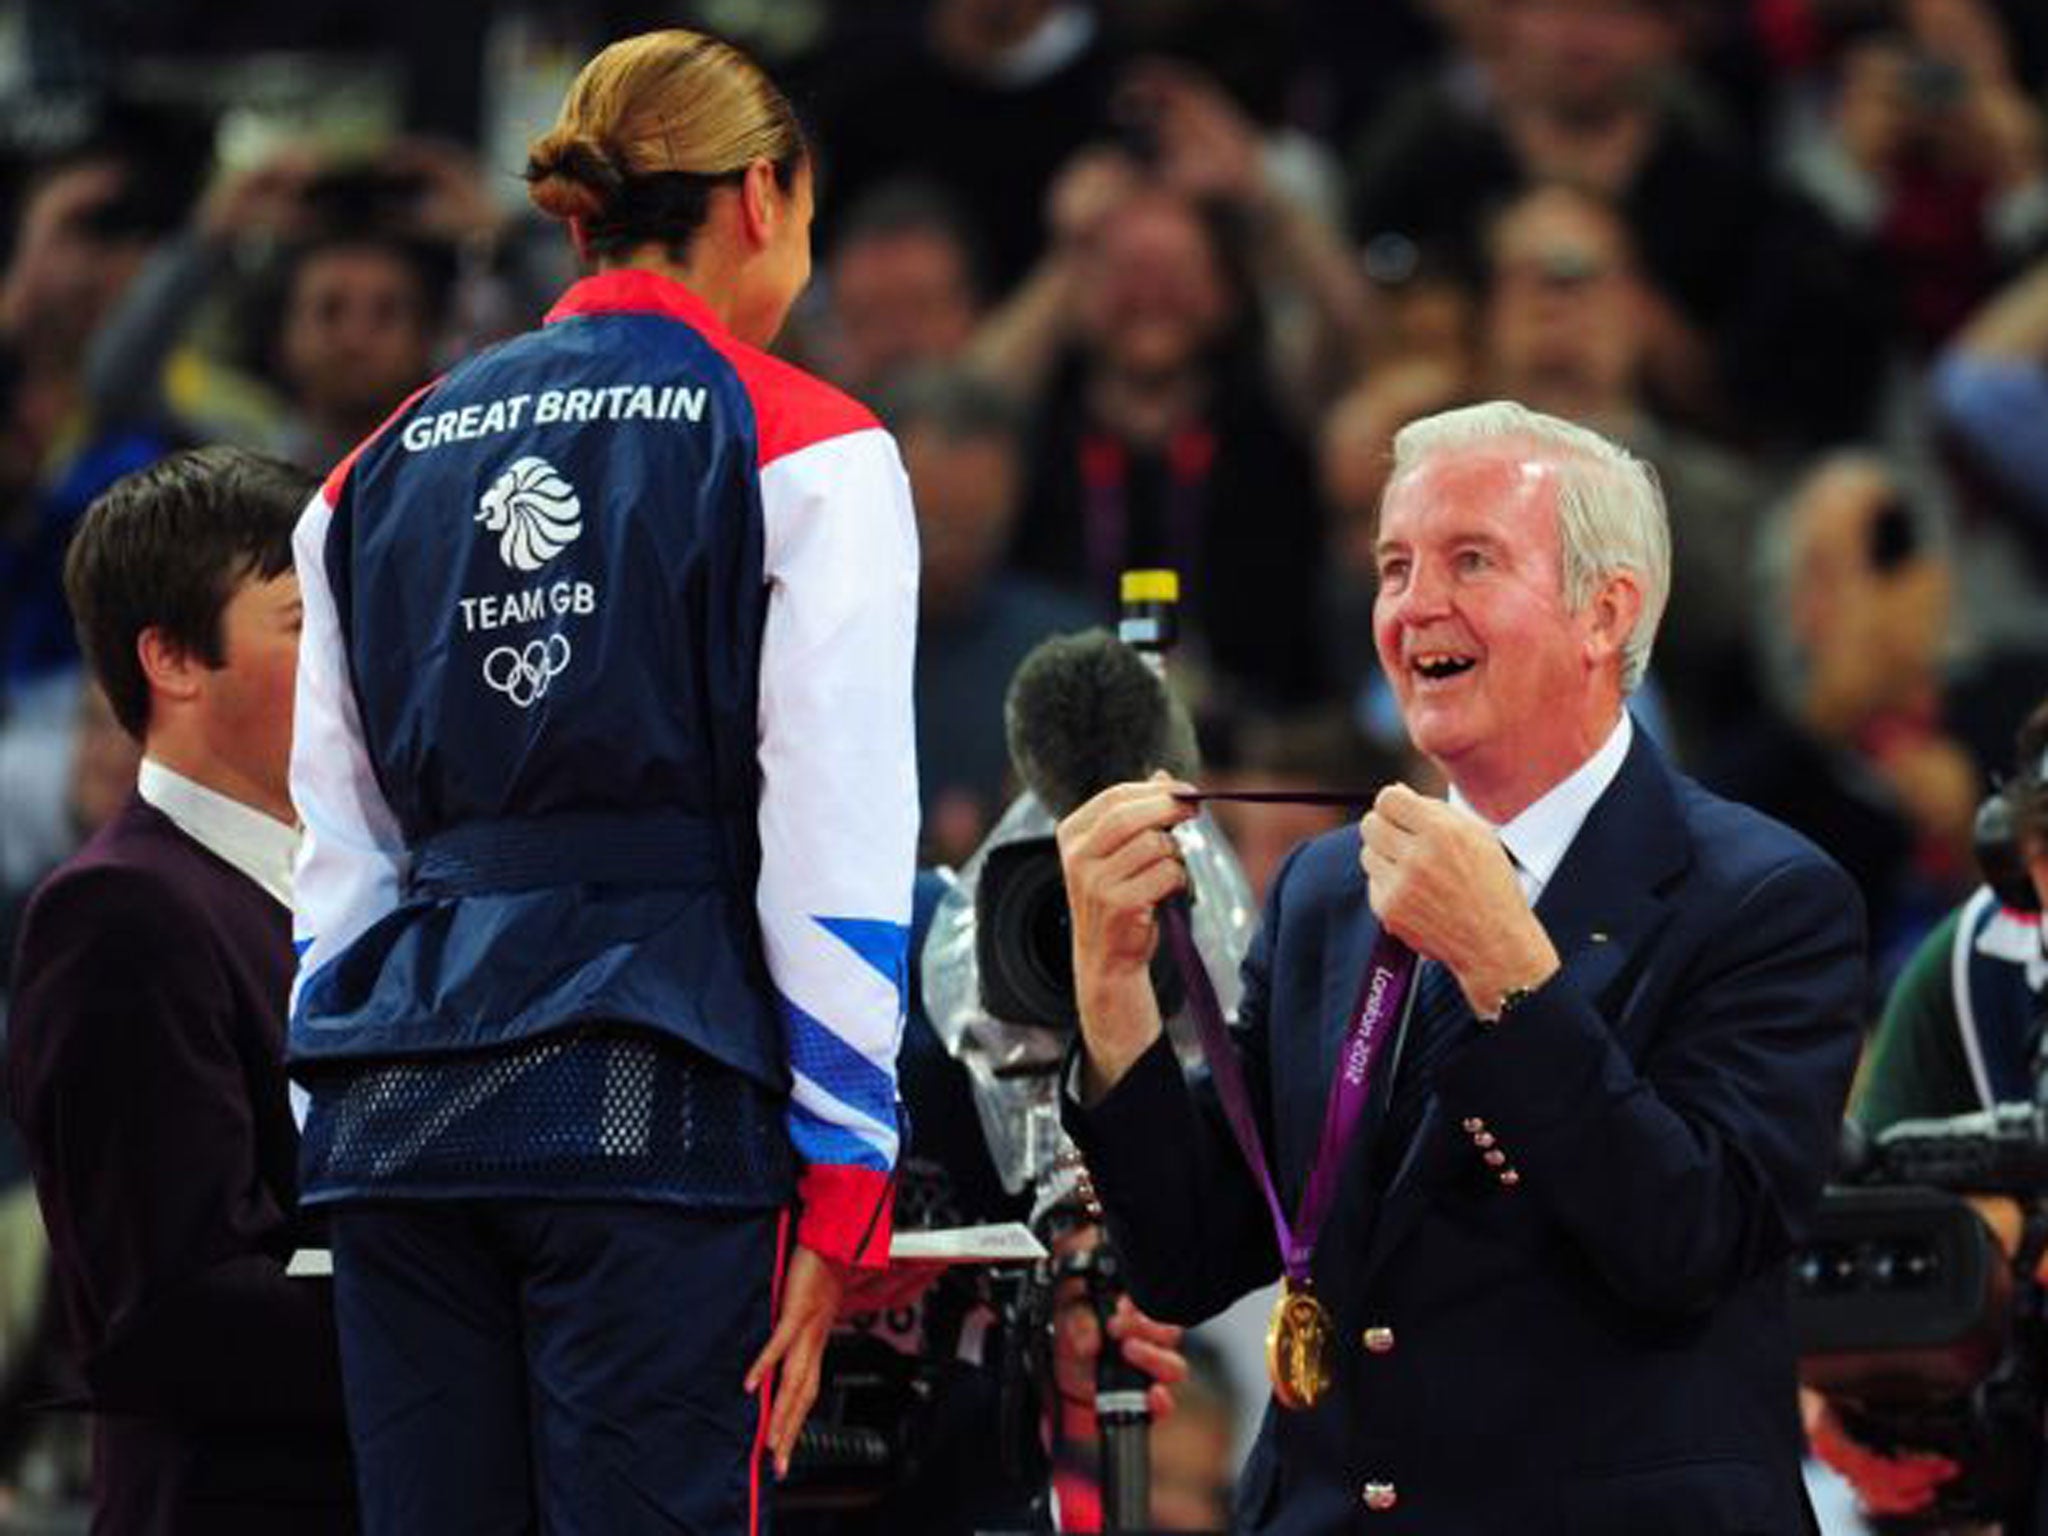 Gold star: Sir Craig Reedie is favourite to be elected as Wada president